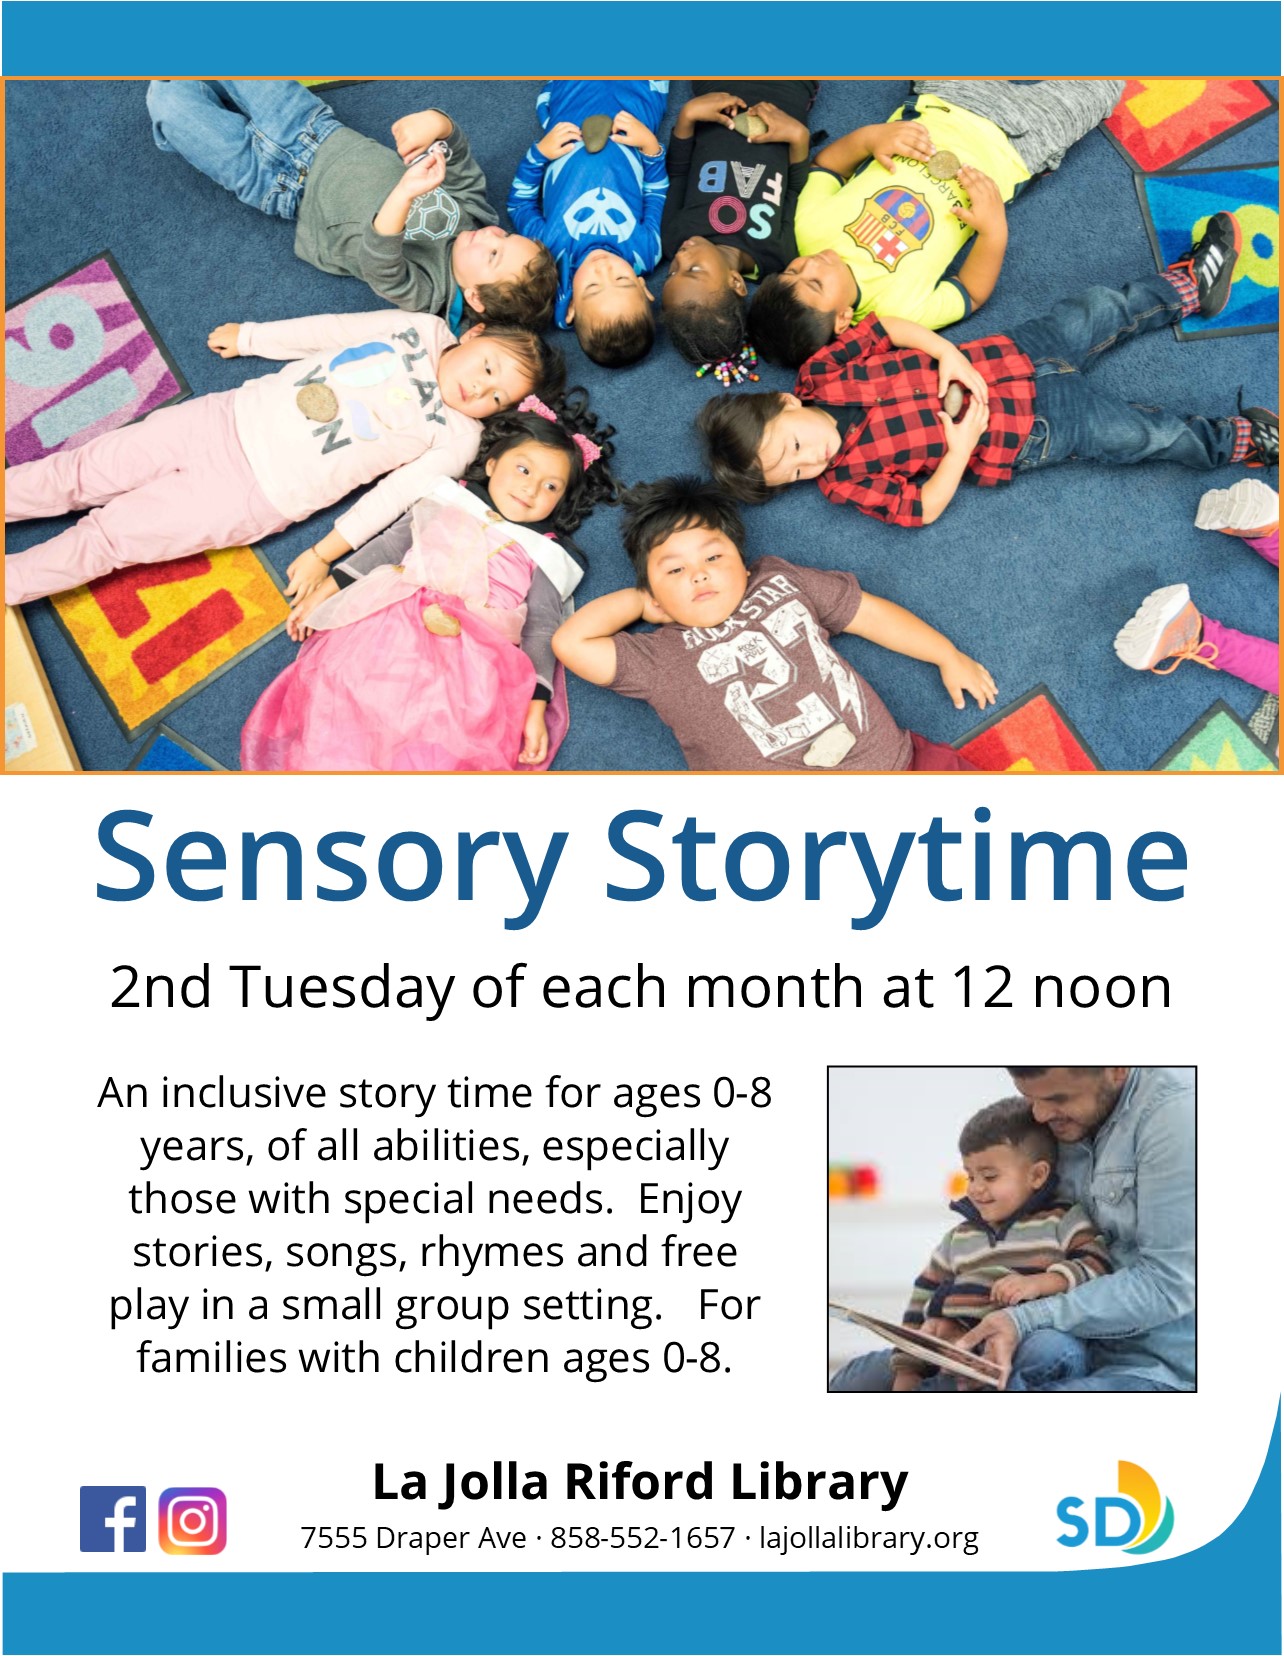 Sensory Storytime is held the second Tuesday of each month at 12 noon.